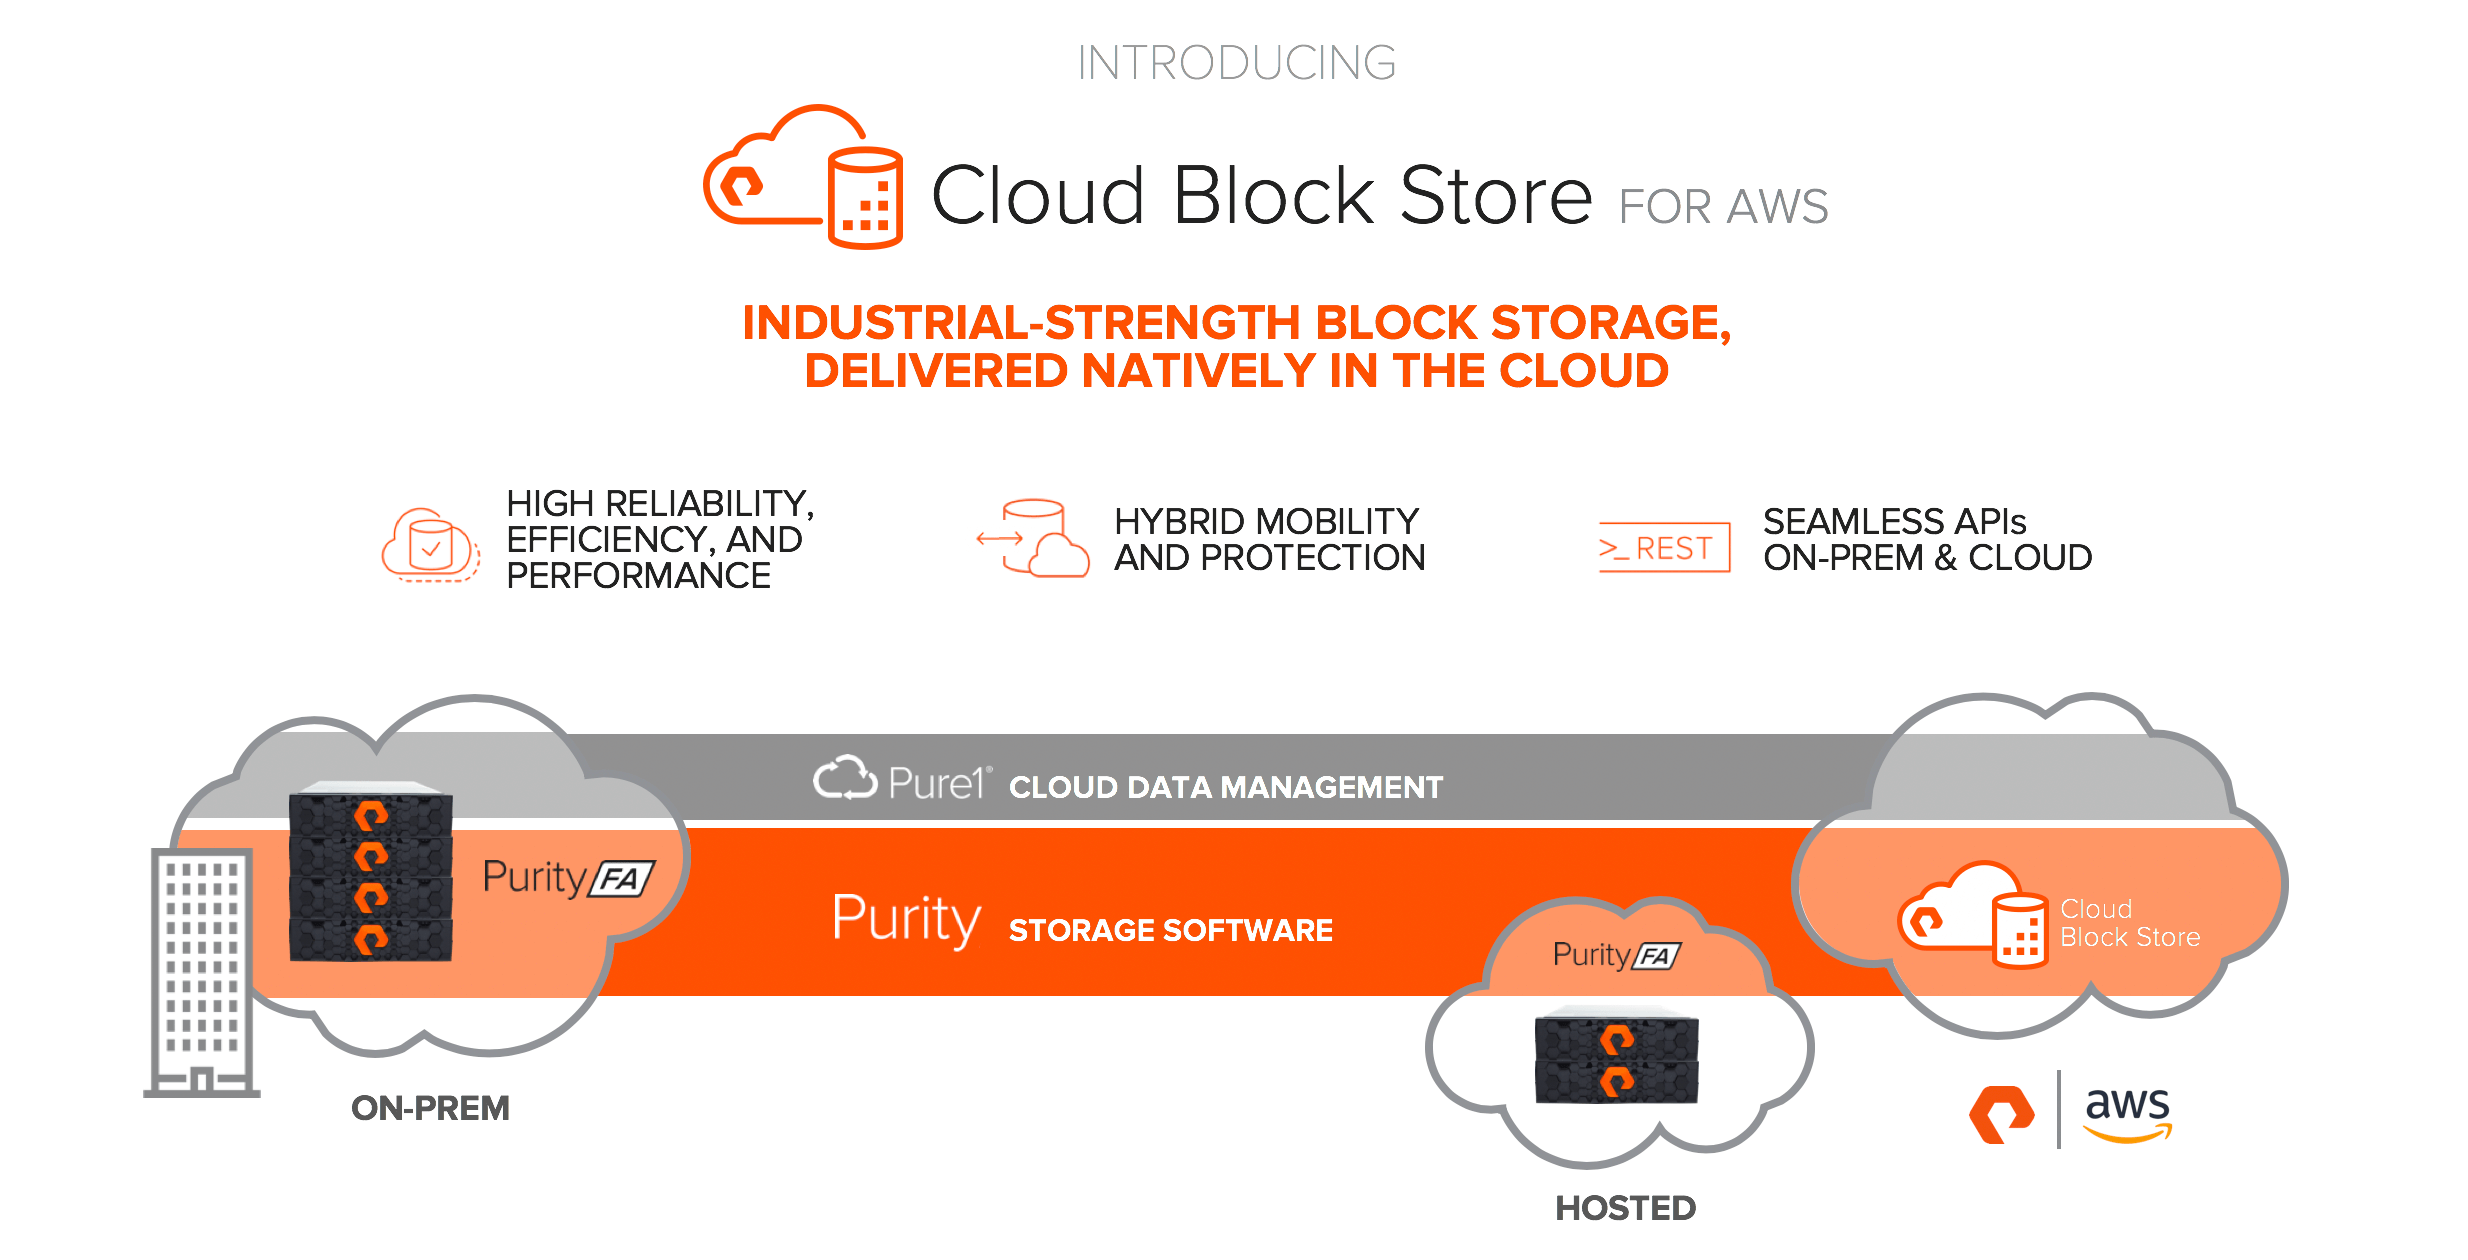 Cloud Block Storage for AWS